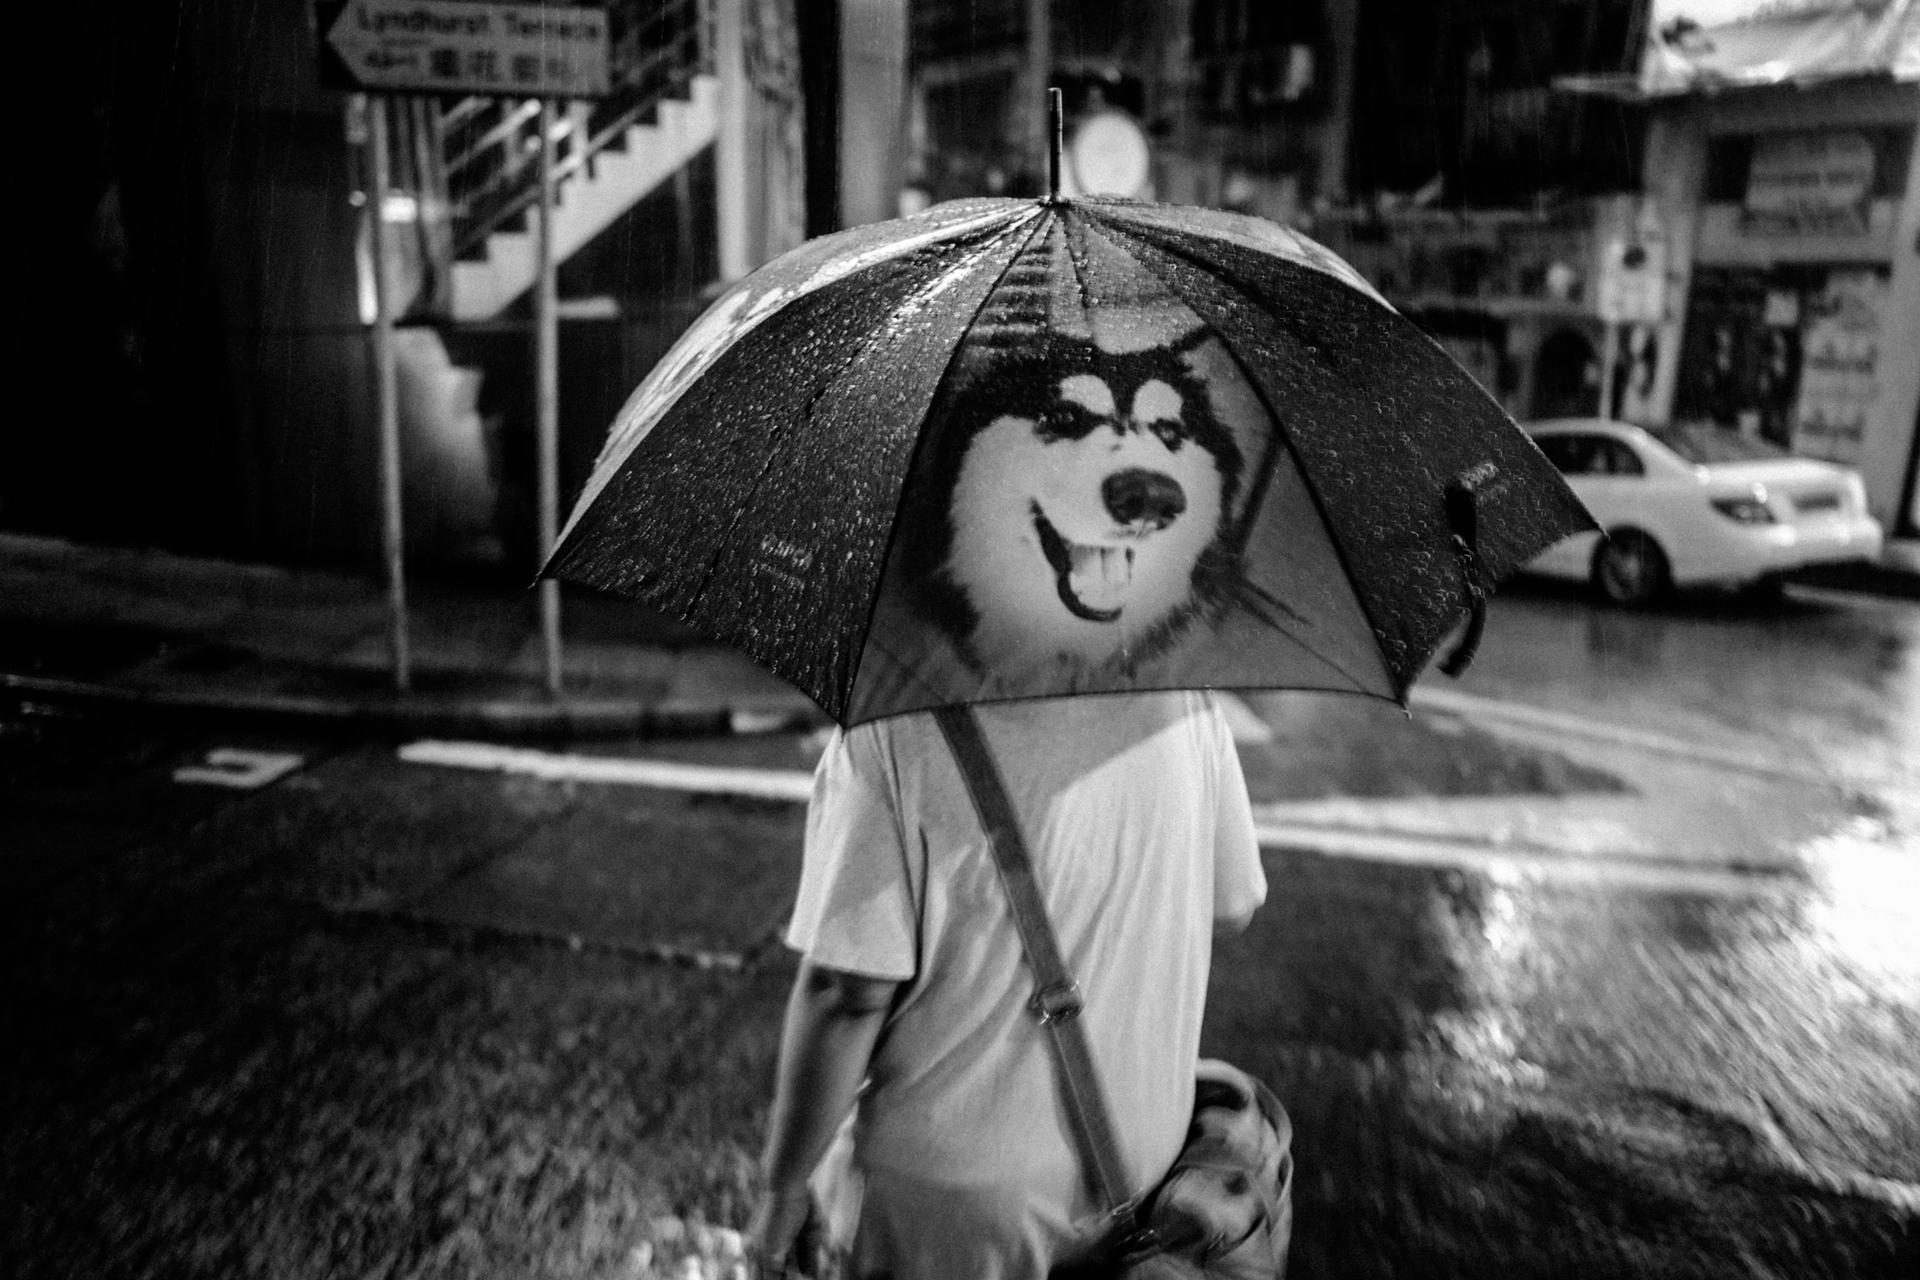 Who let the dog out by Chia Aik Beng